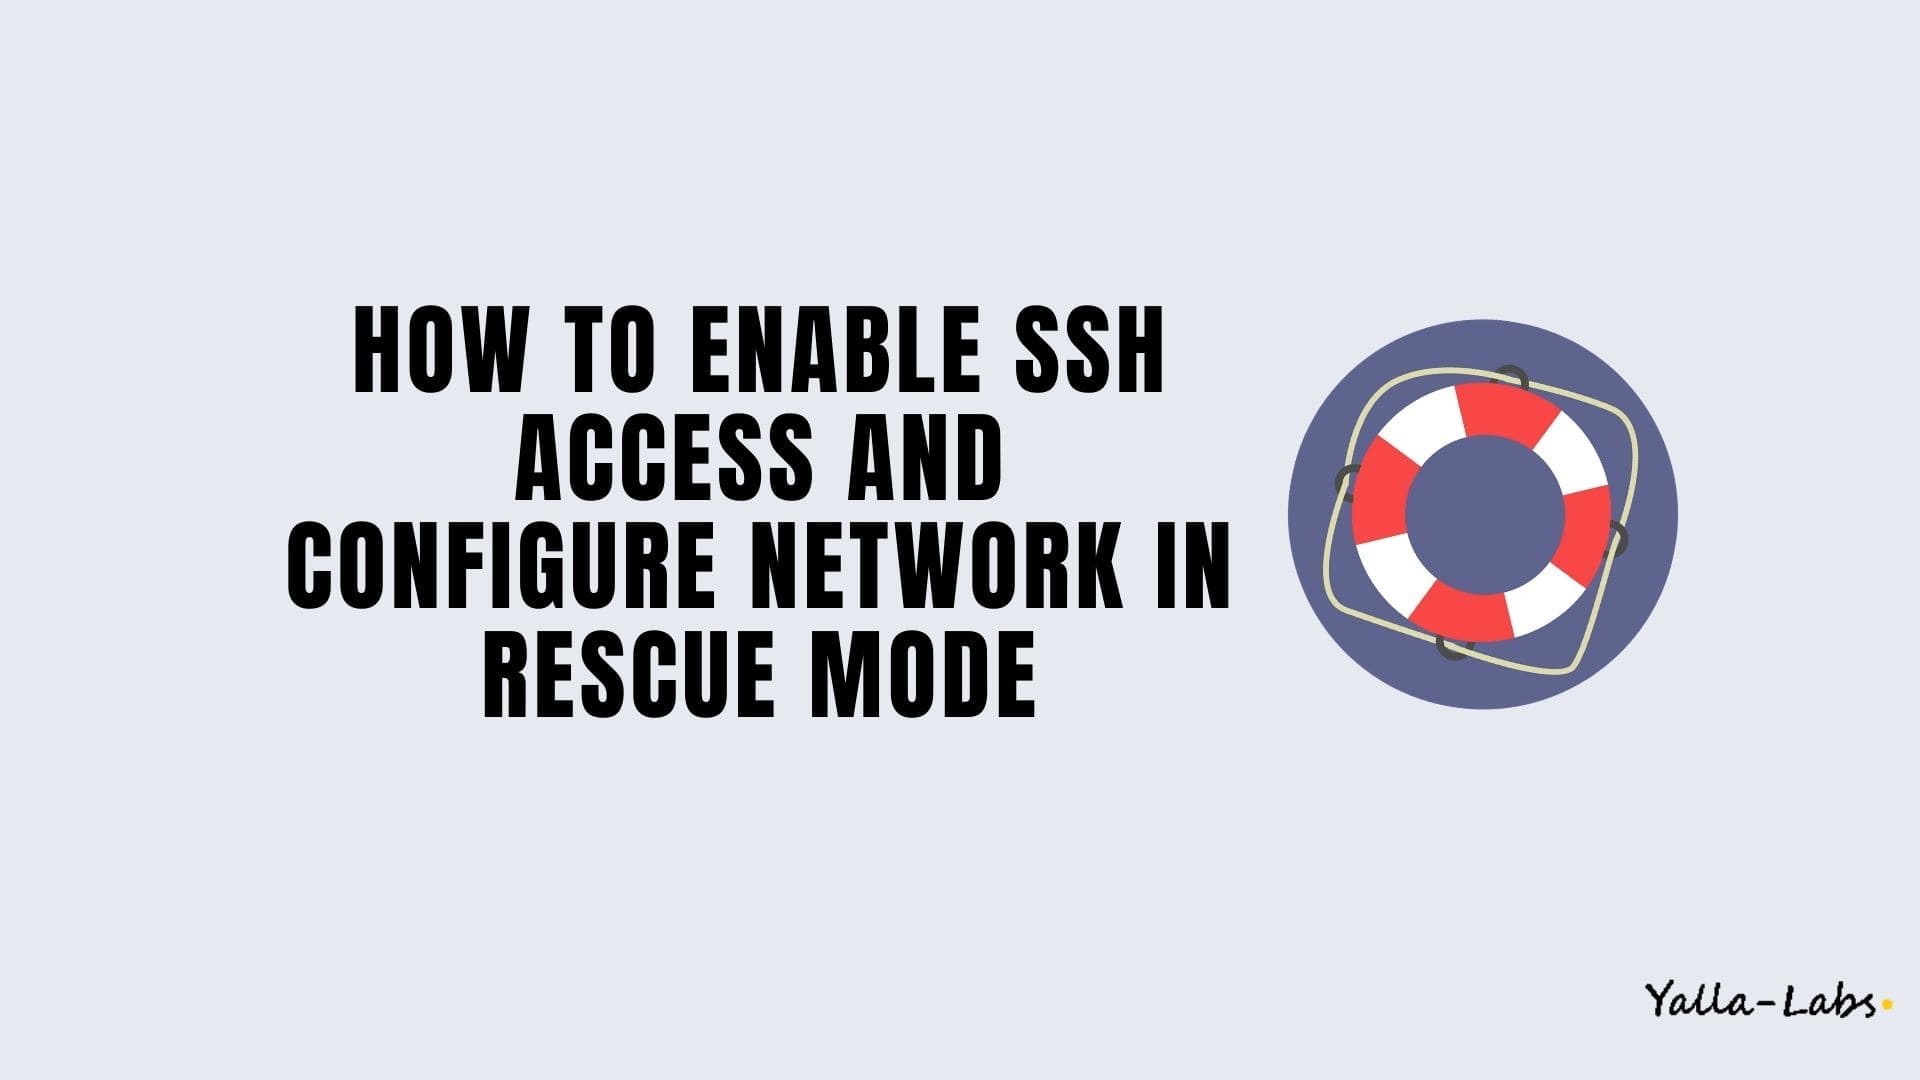 How to enable SSH access and configure network in rescue mode